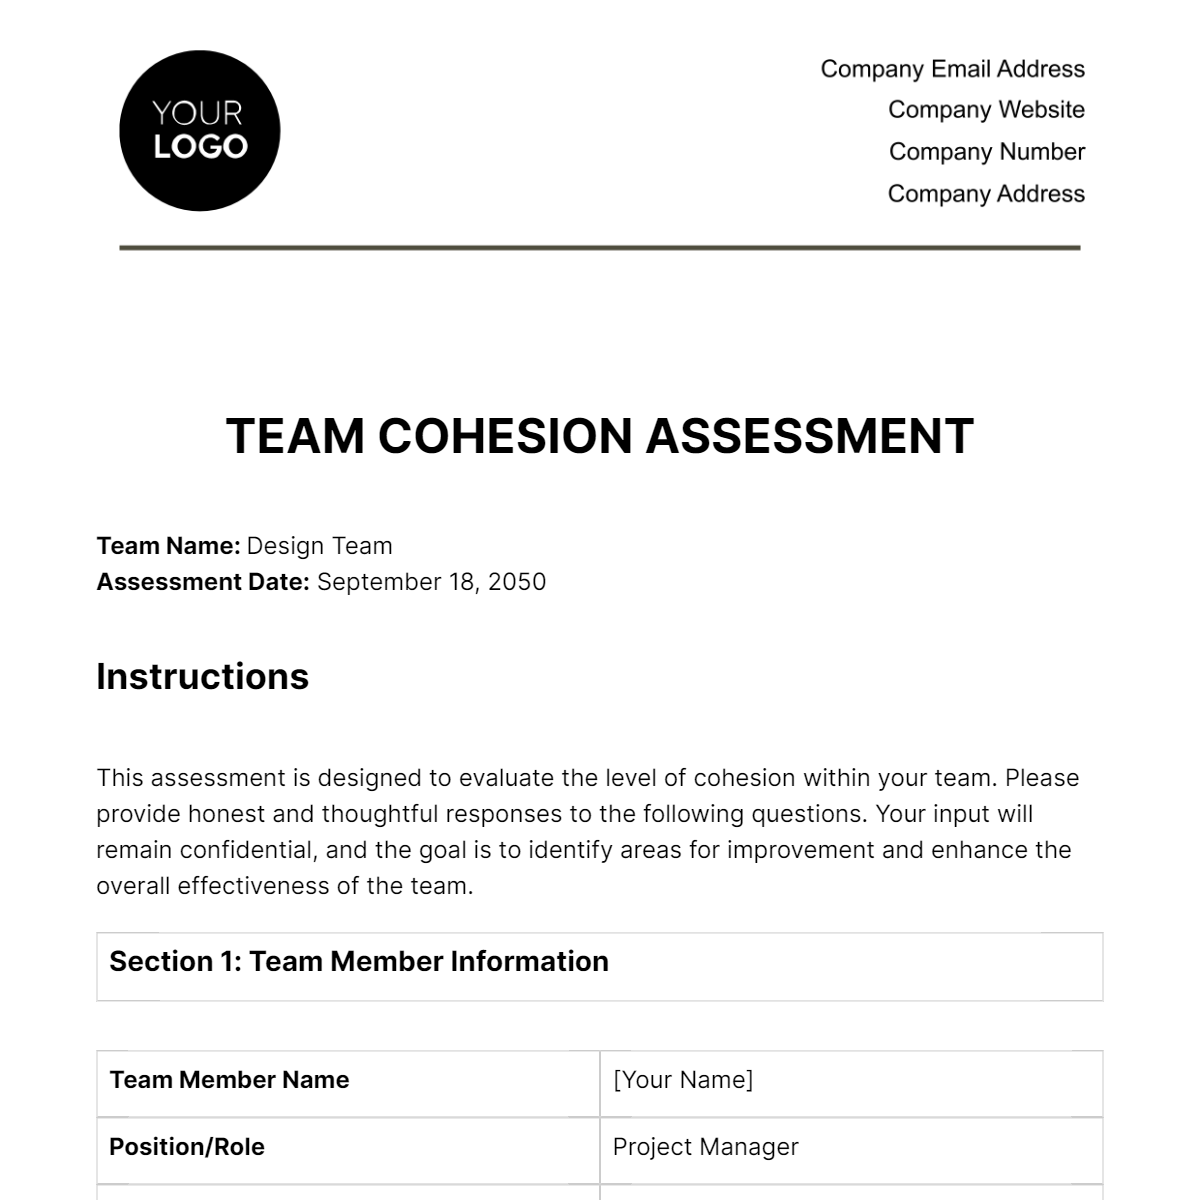 Team Cohesion Assessment HR Template